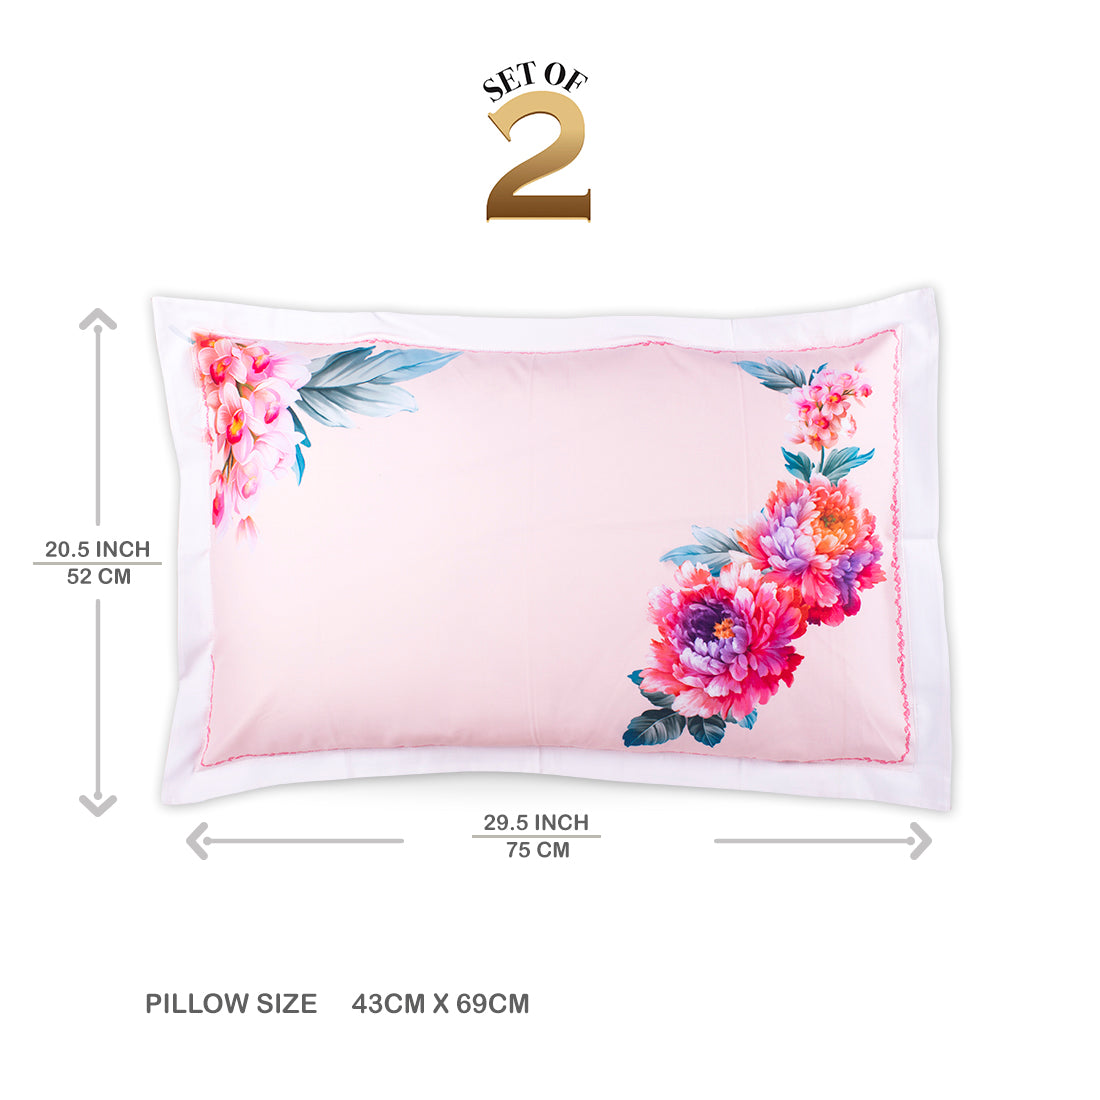 V2G Corner Bunches Printed Pillow Covers-Pair